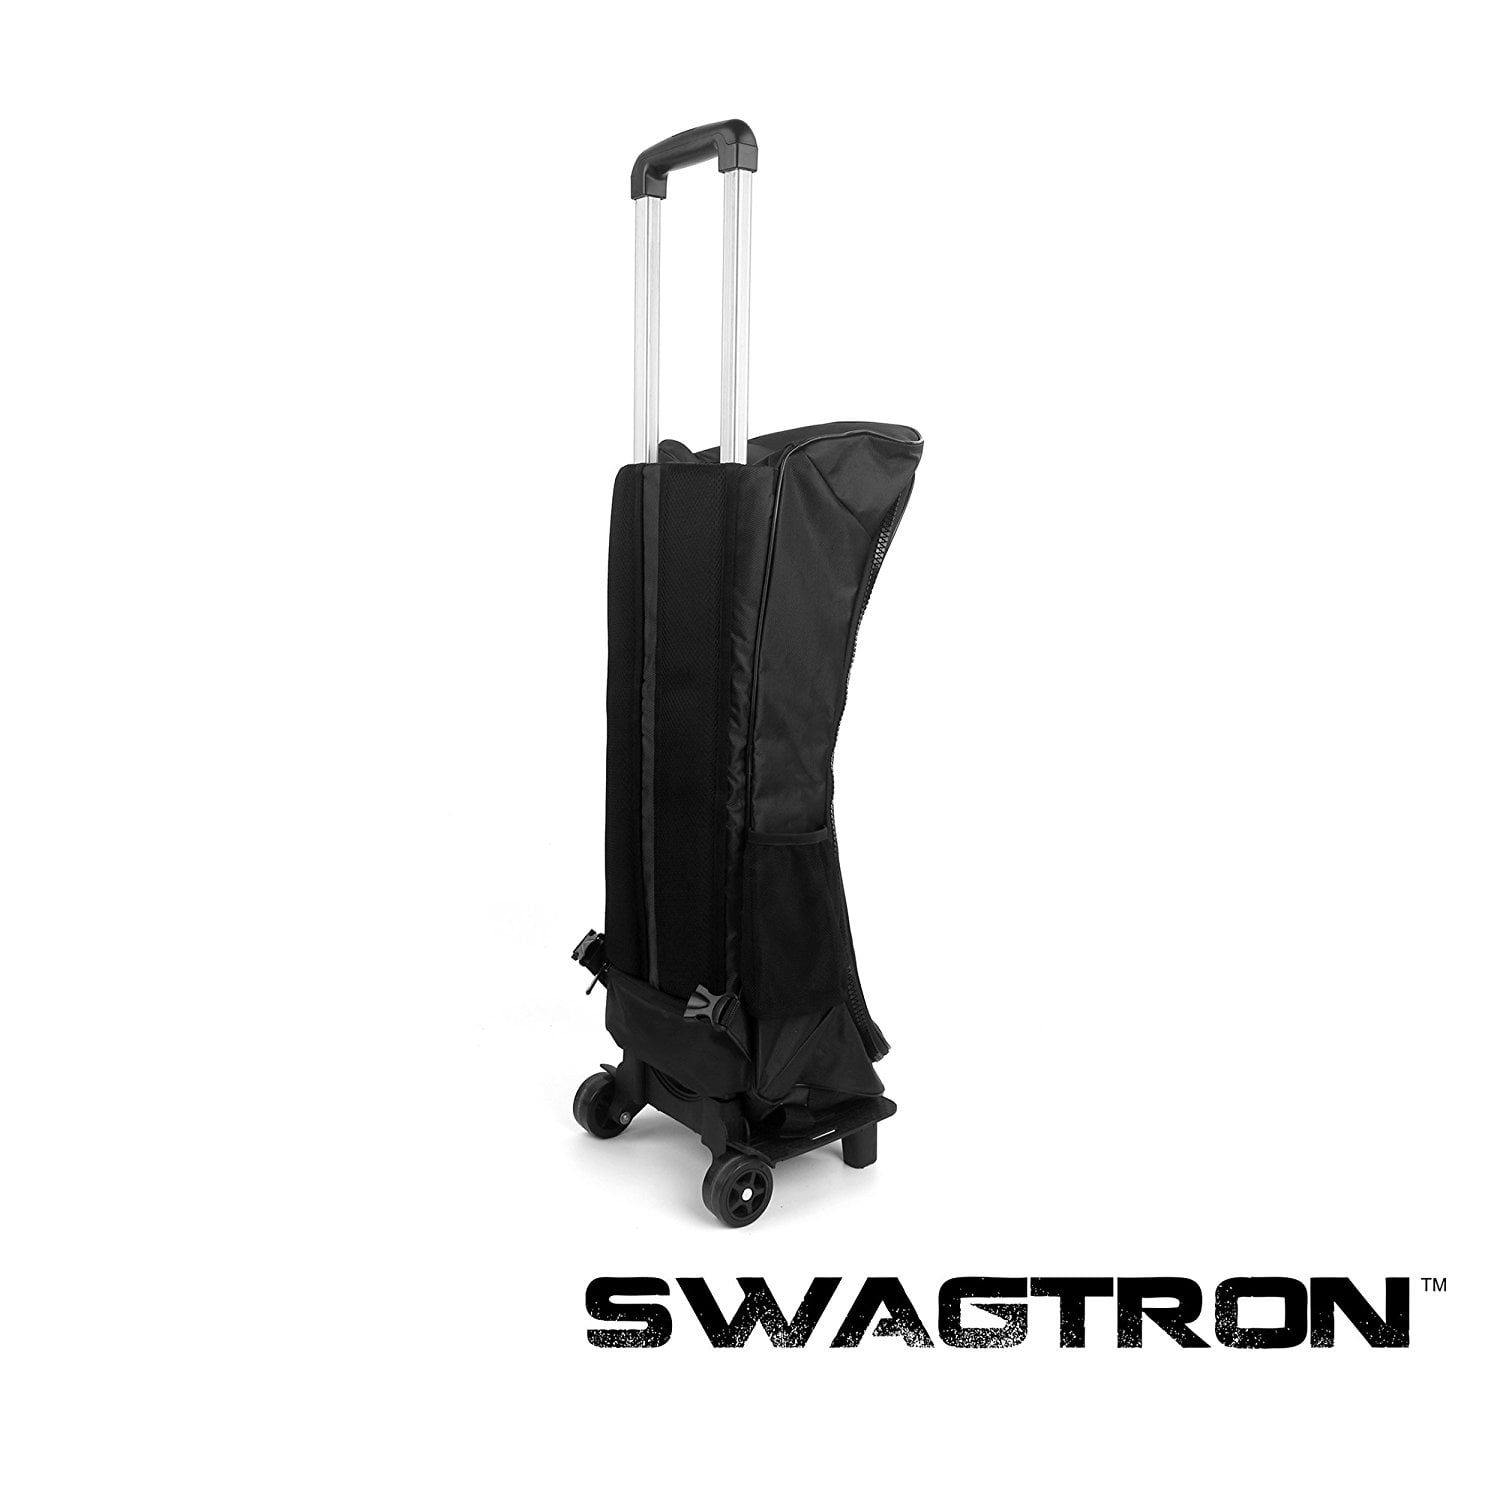 Brand New Hoverboard Carrying Bag Case Back Pack FREE SHIPPING